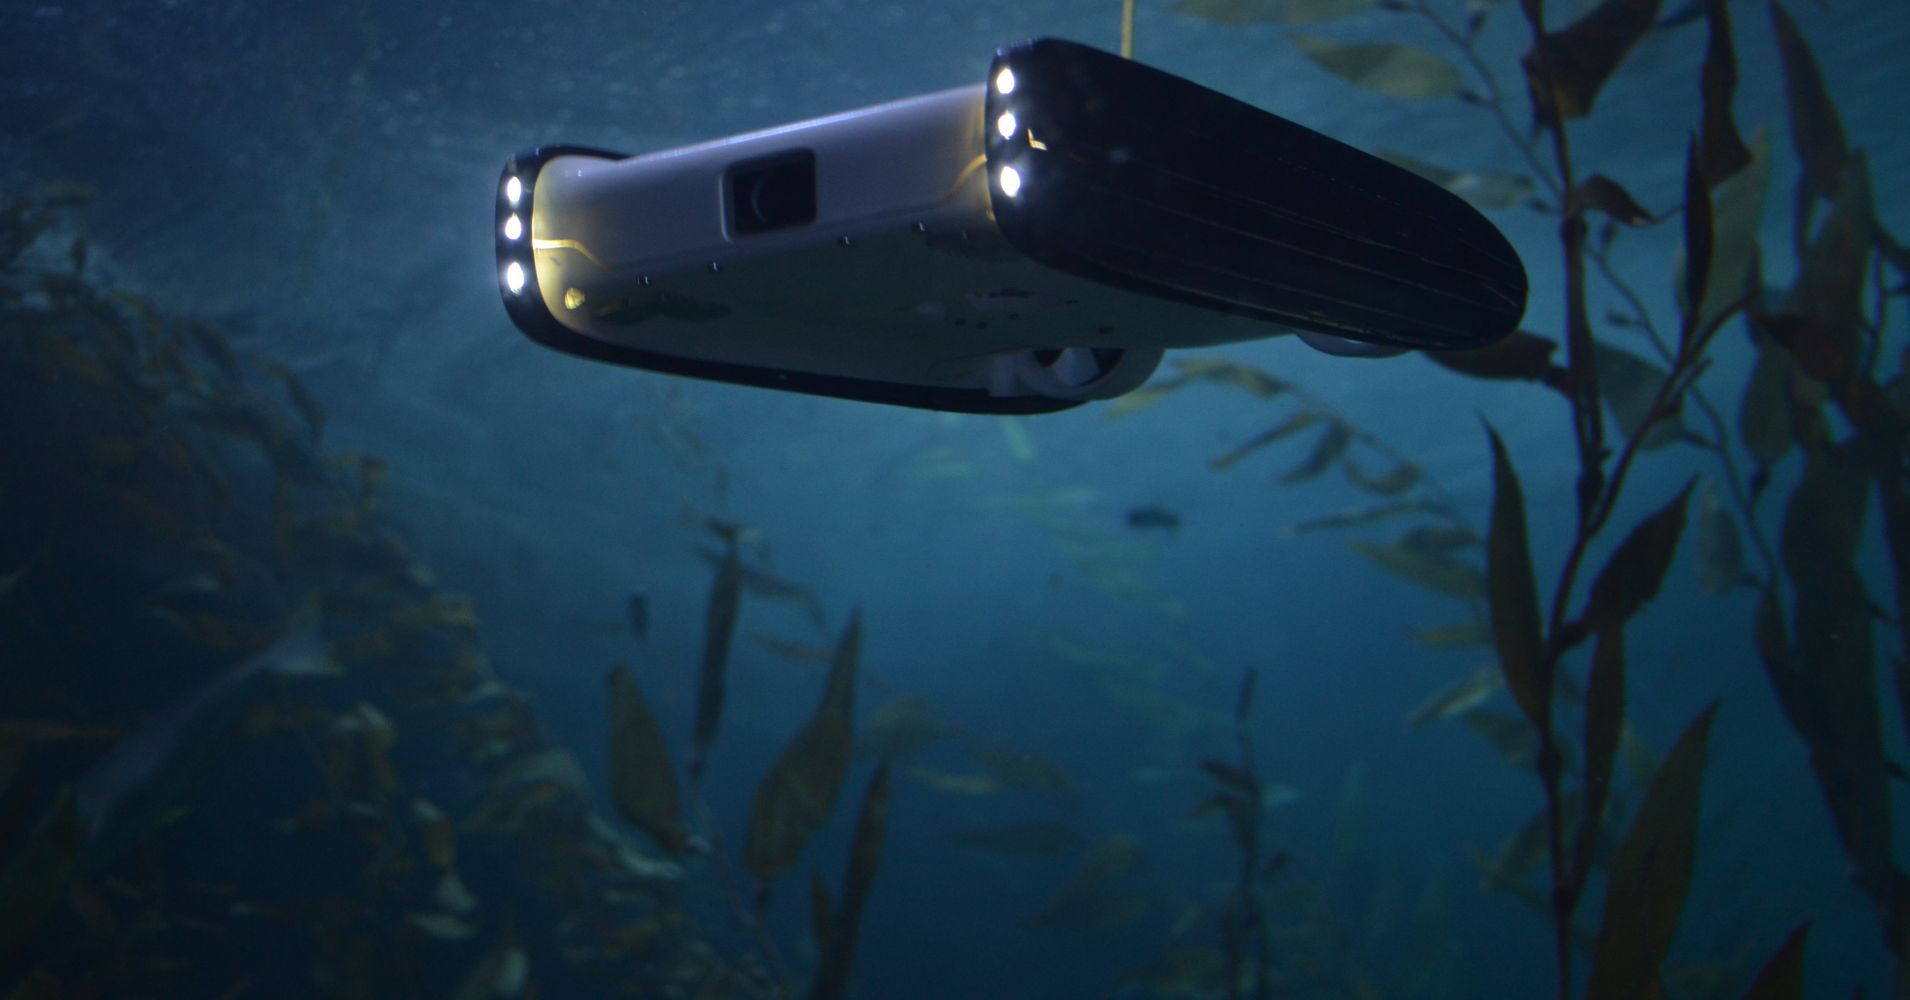 This Underwater Drone Could Let You Explore The Ocean ...